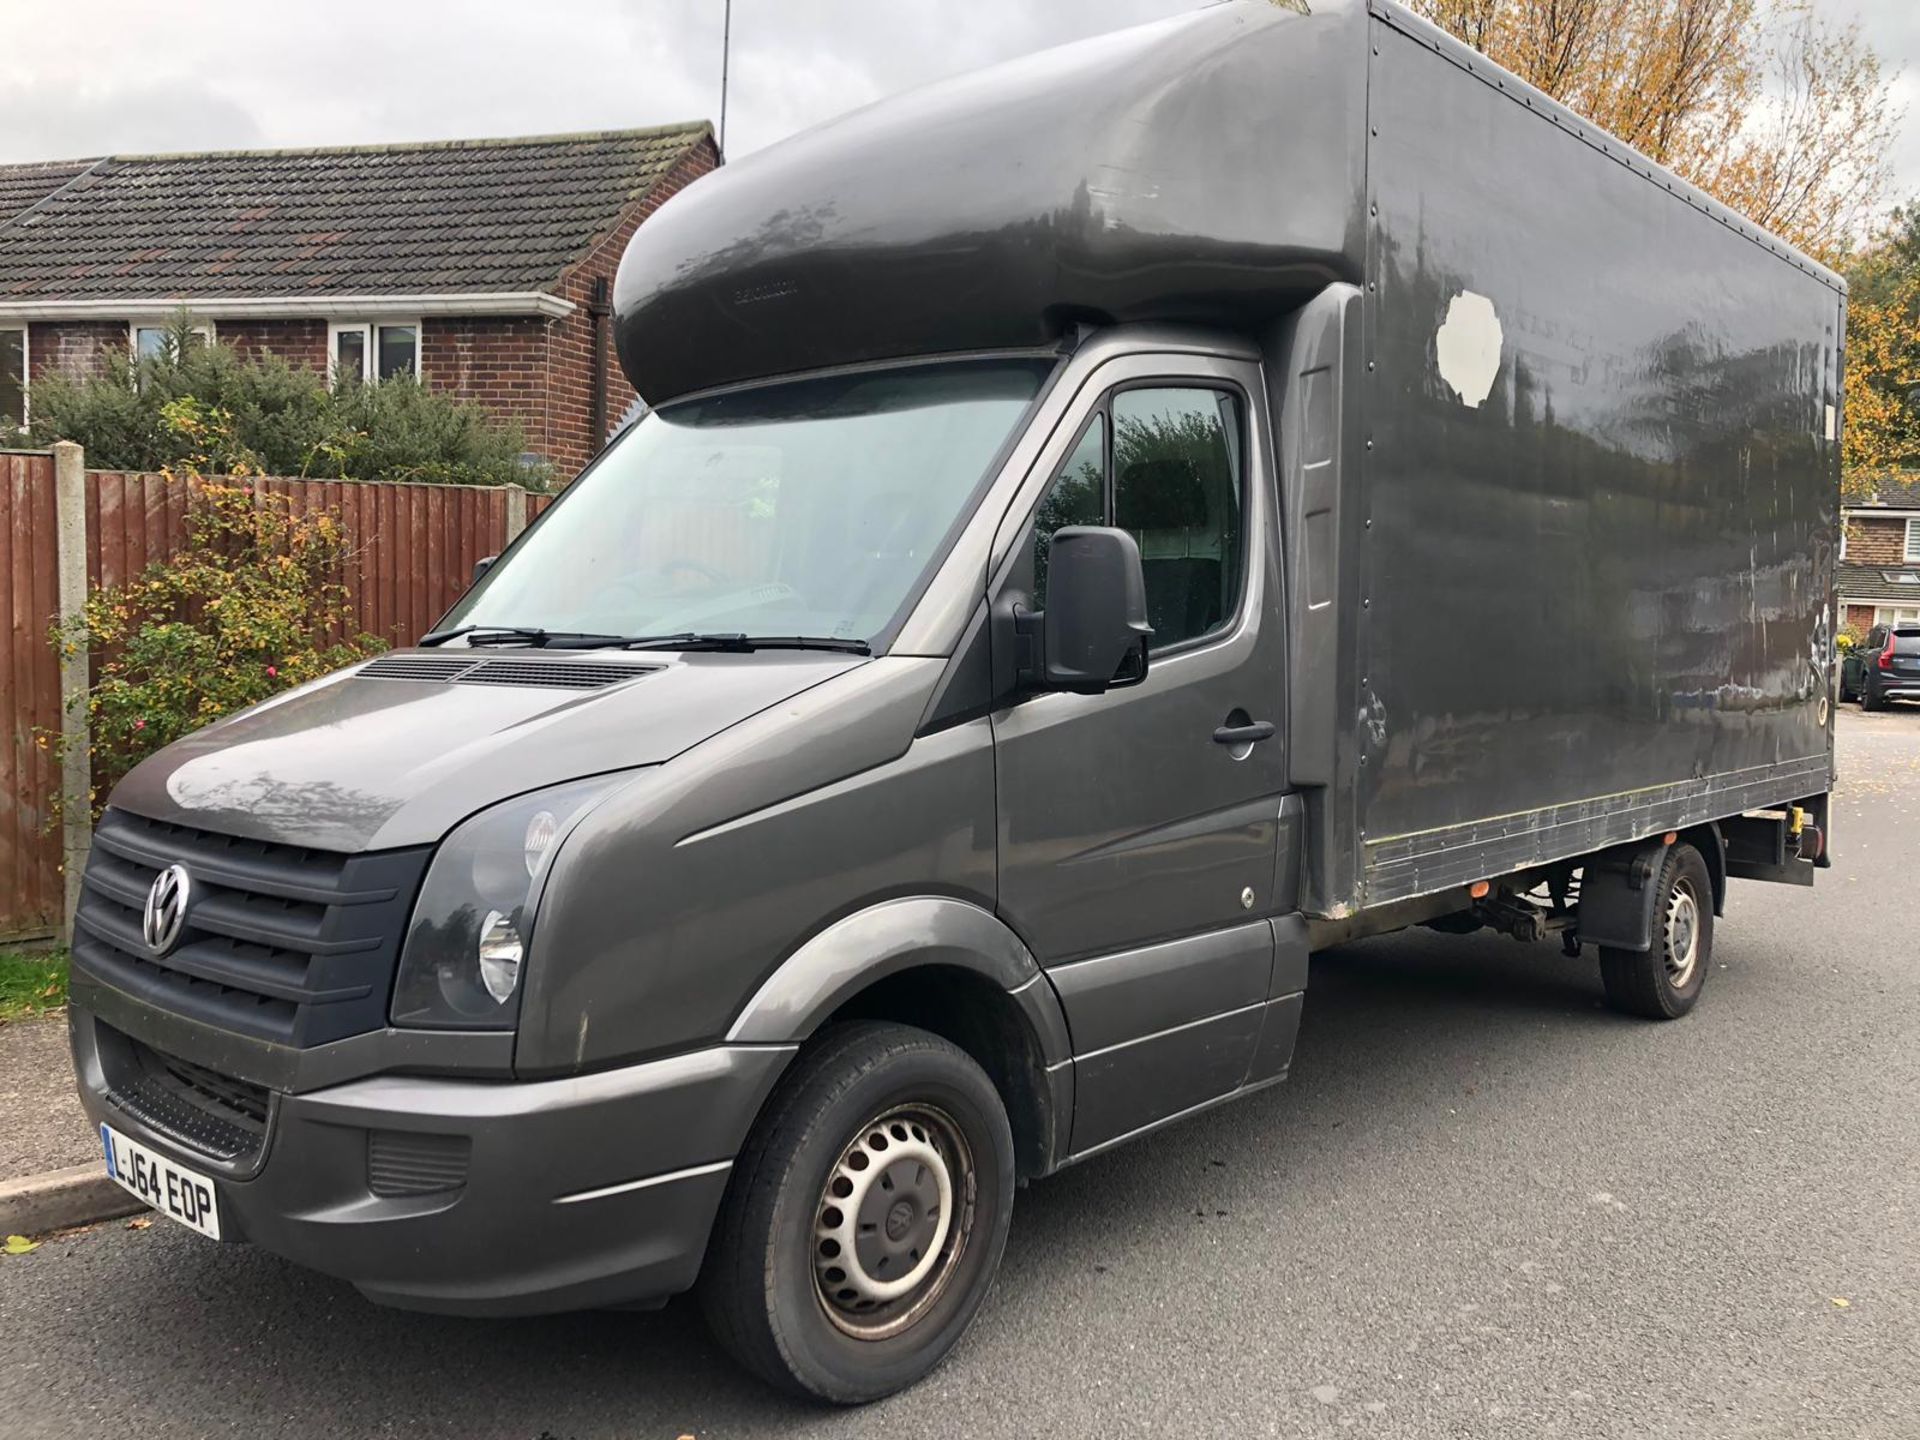 Volkswagen Crafter C35 2.0 TDI LWD Luton with Tail Lift - Image 4 of 13